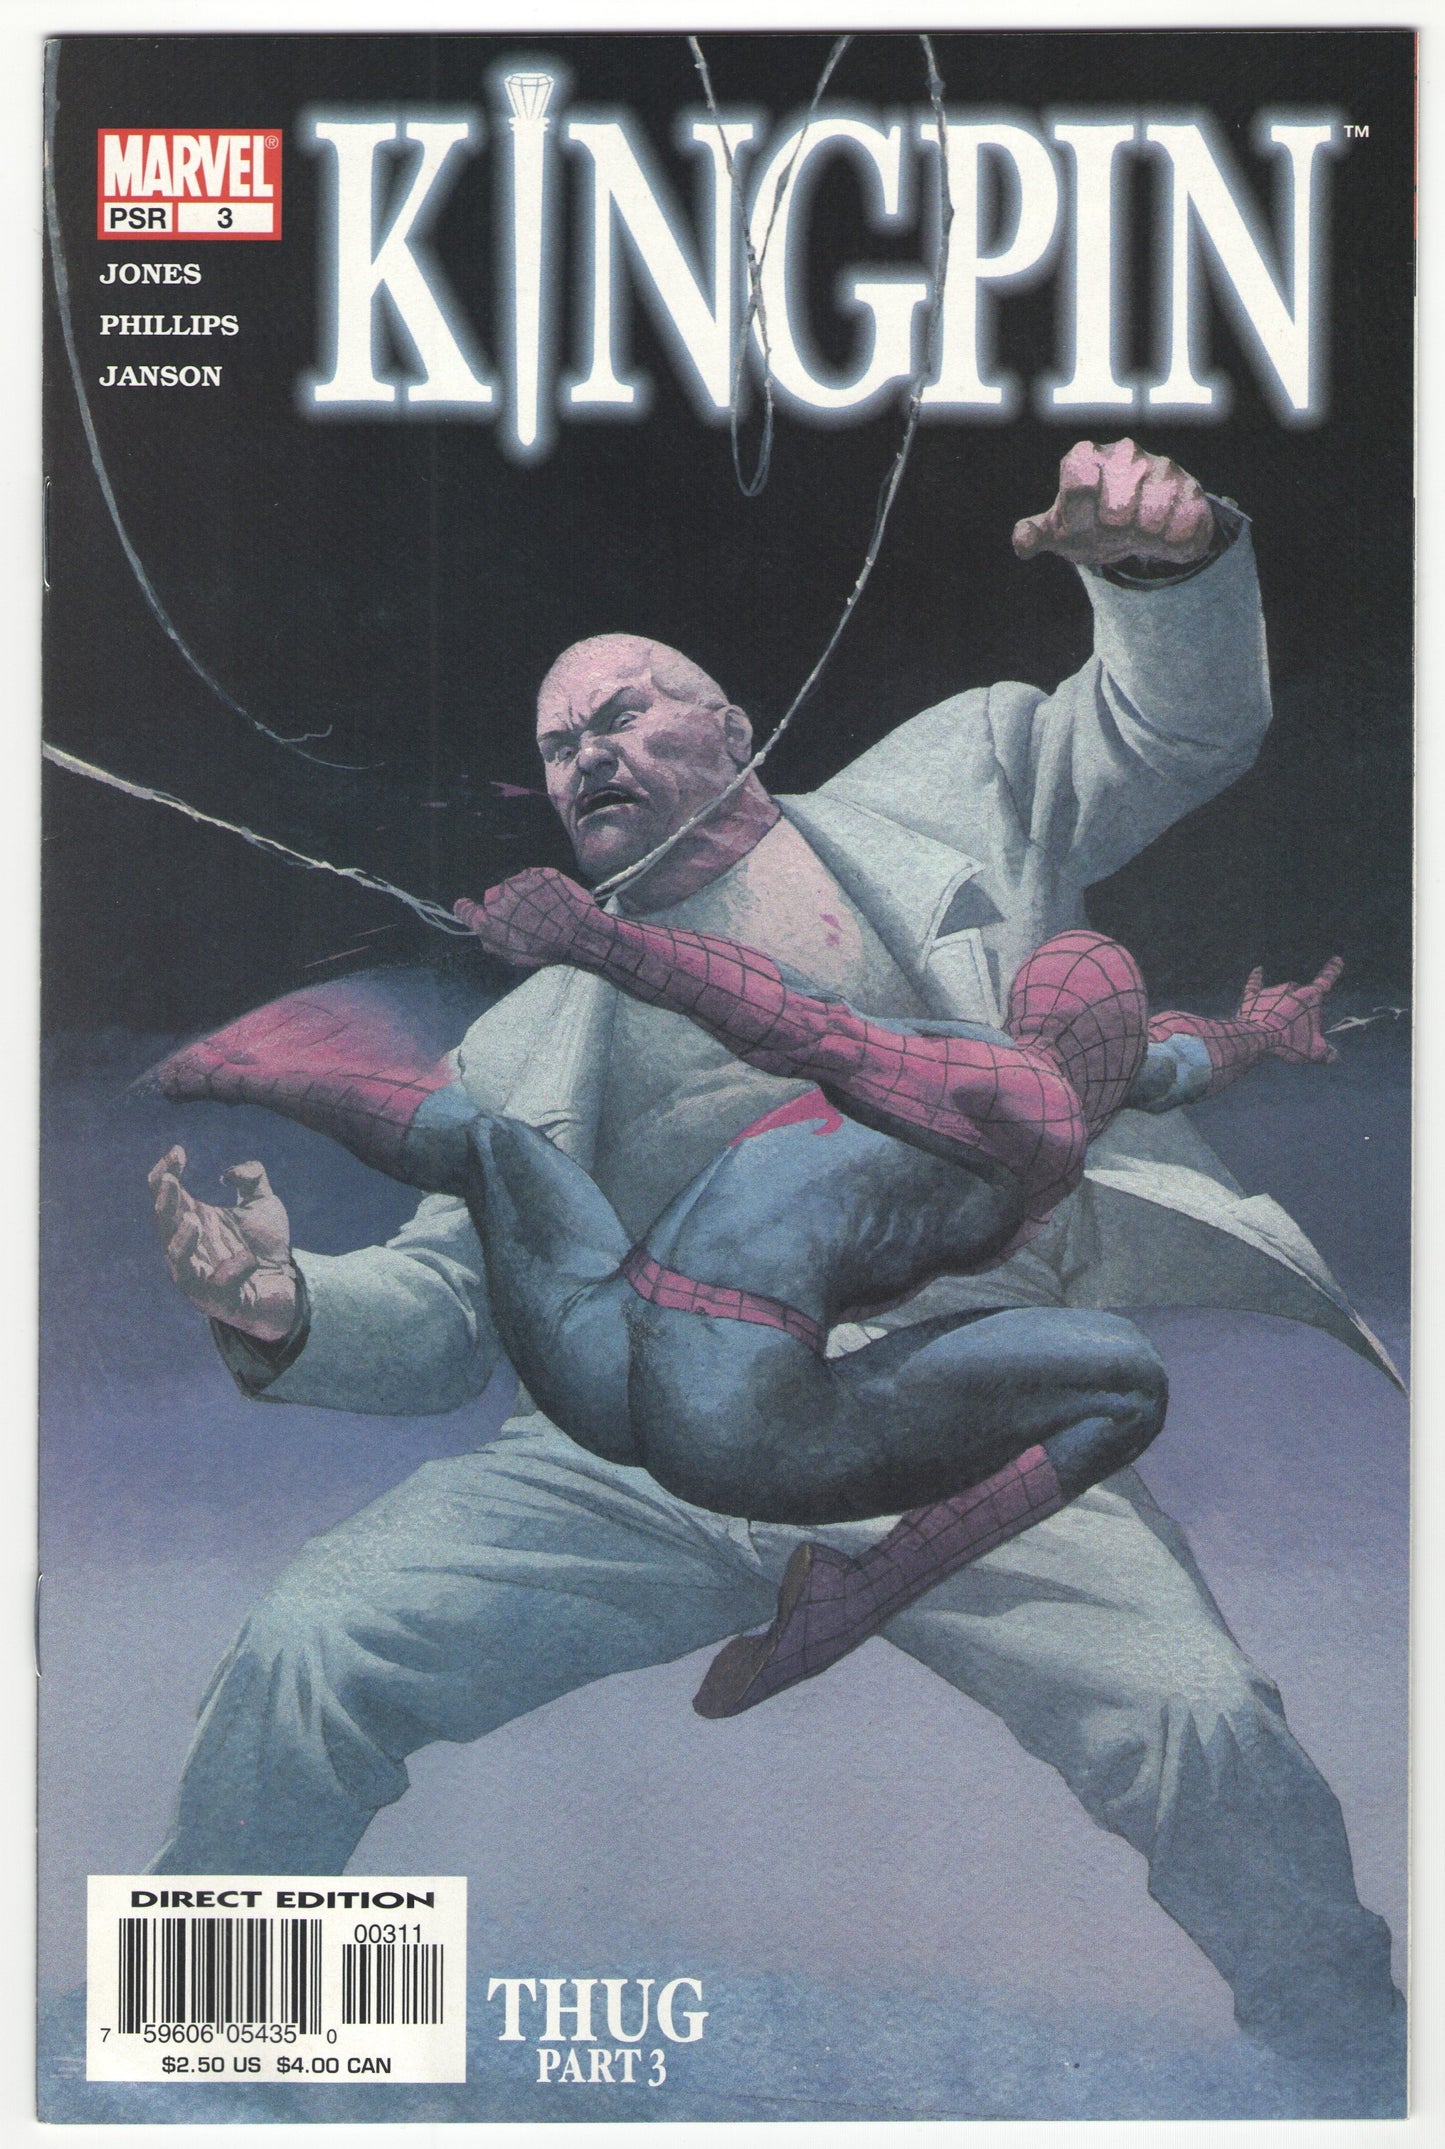 Kingpin (2003-2004) Complete Limited Series